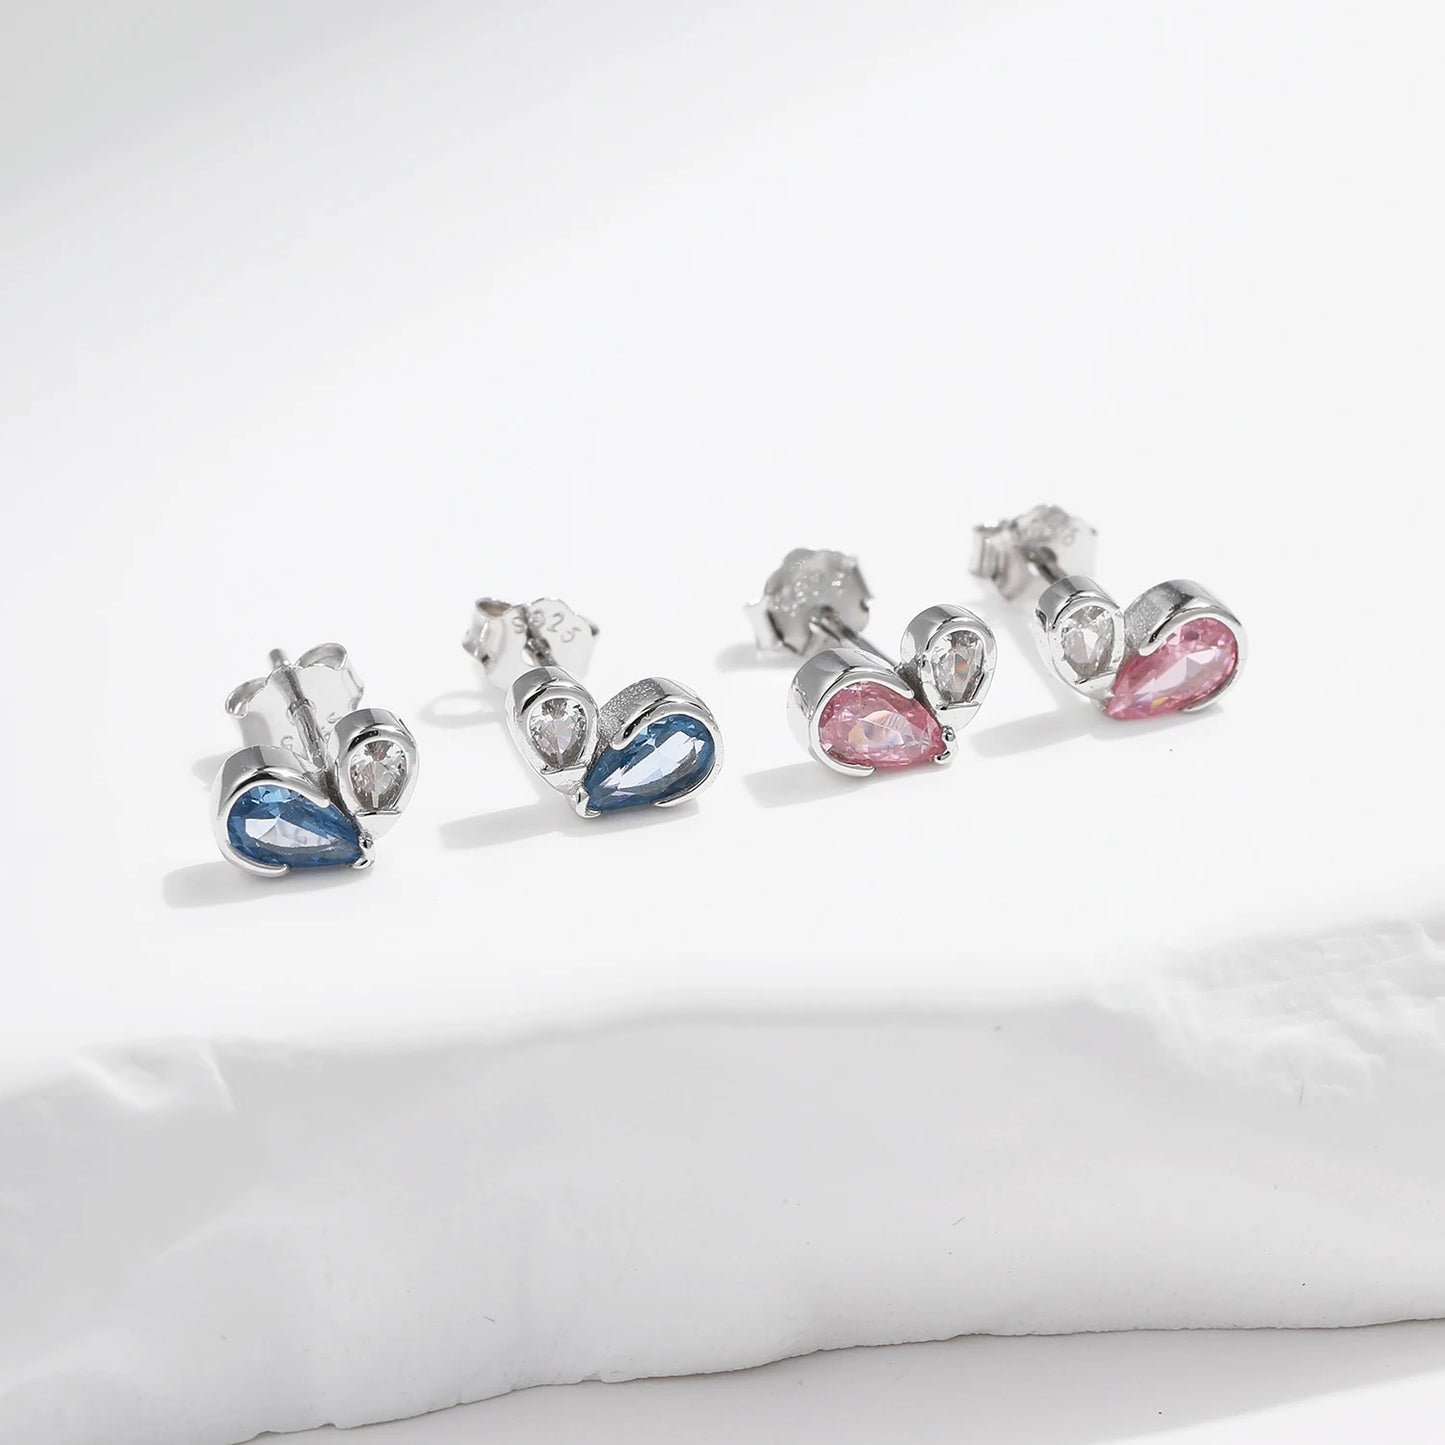 Stunning MQ 925 Silver Heart Earrings - Perfect for Women's Fine Jewelry Collection!